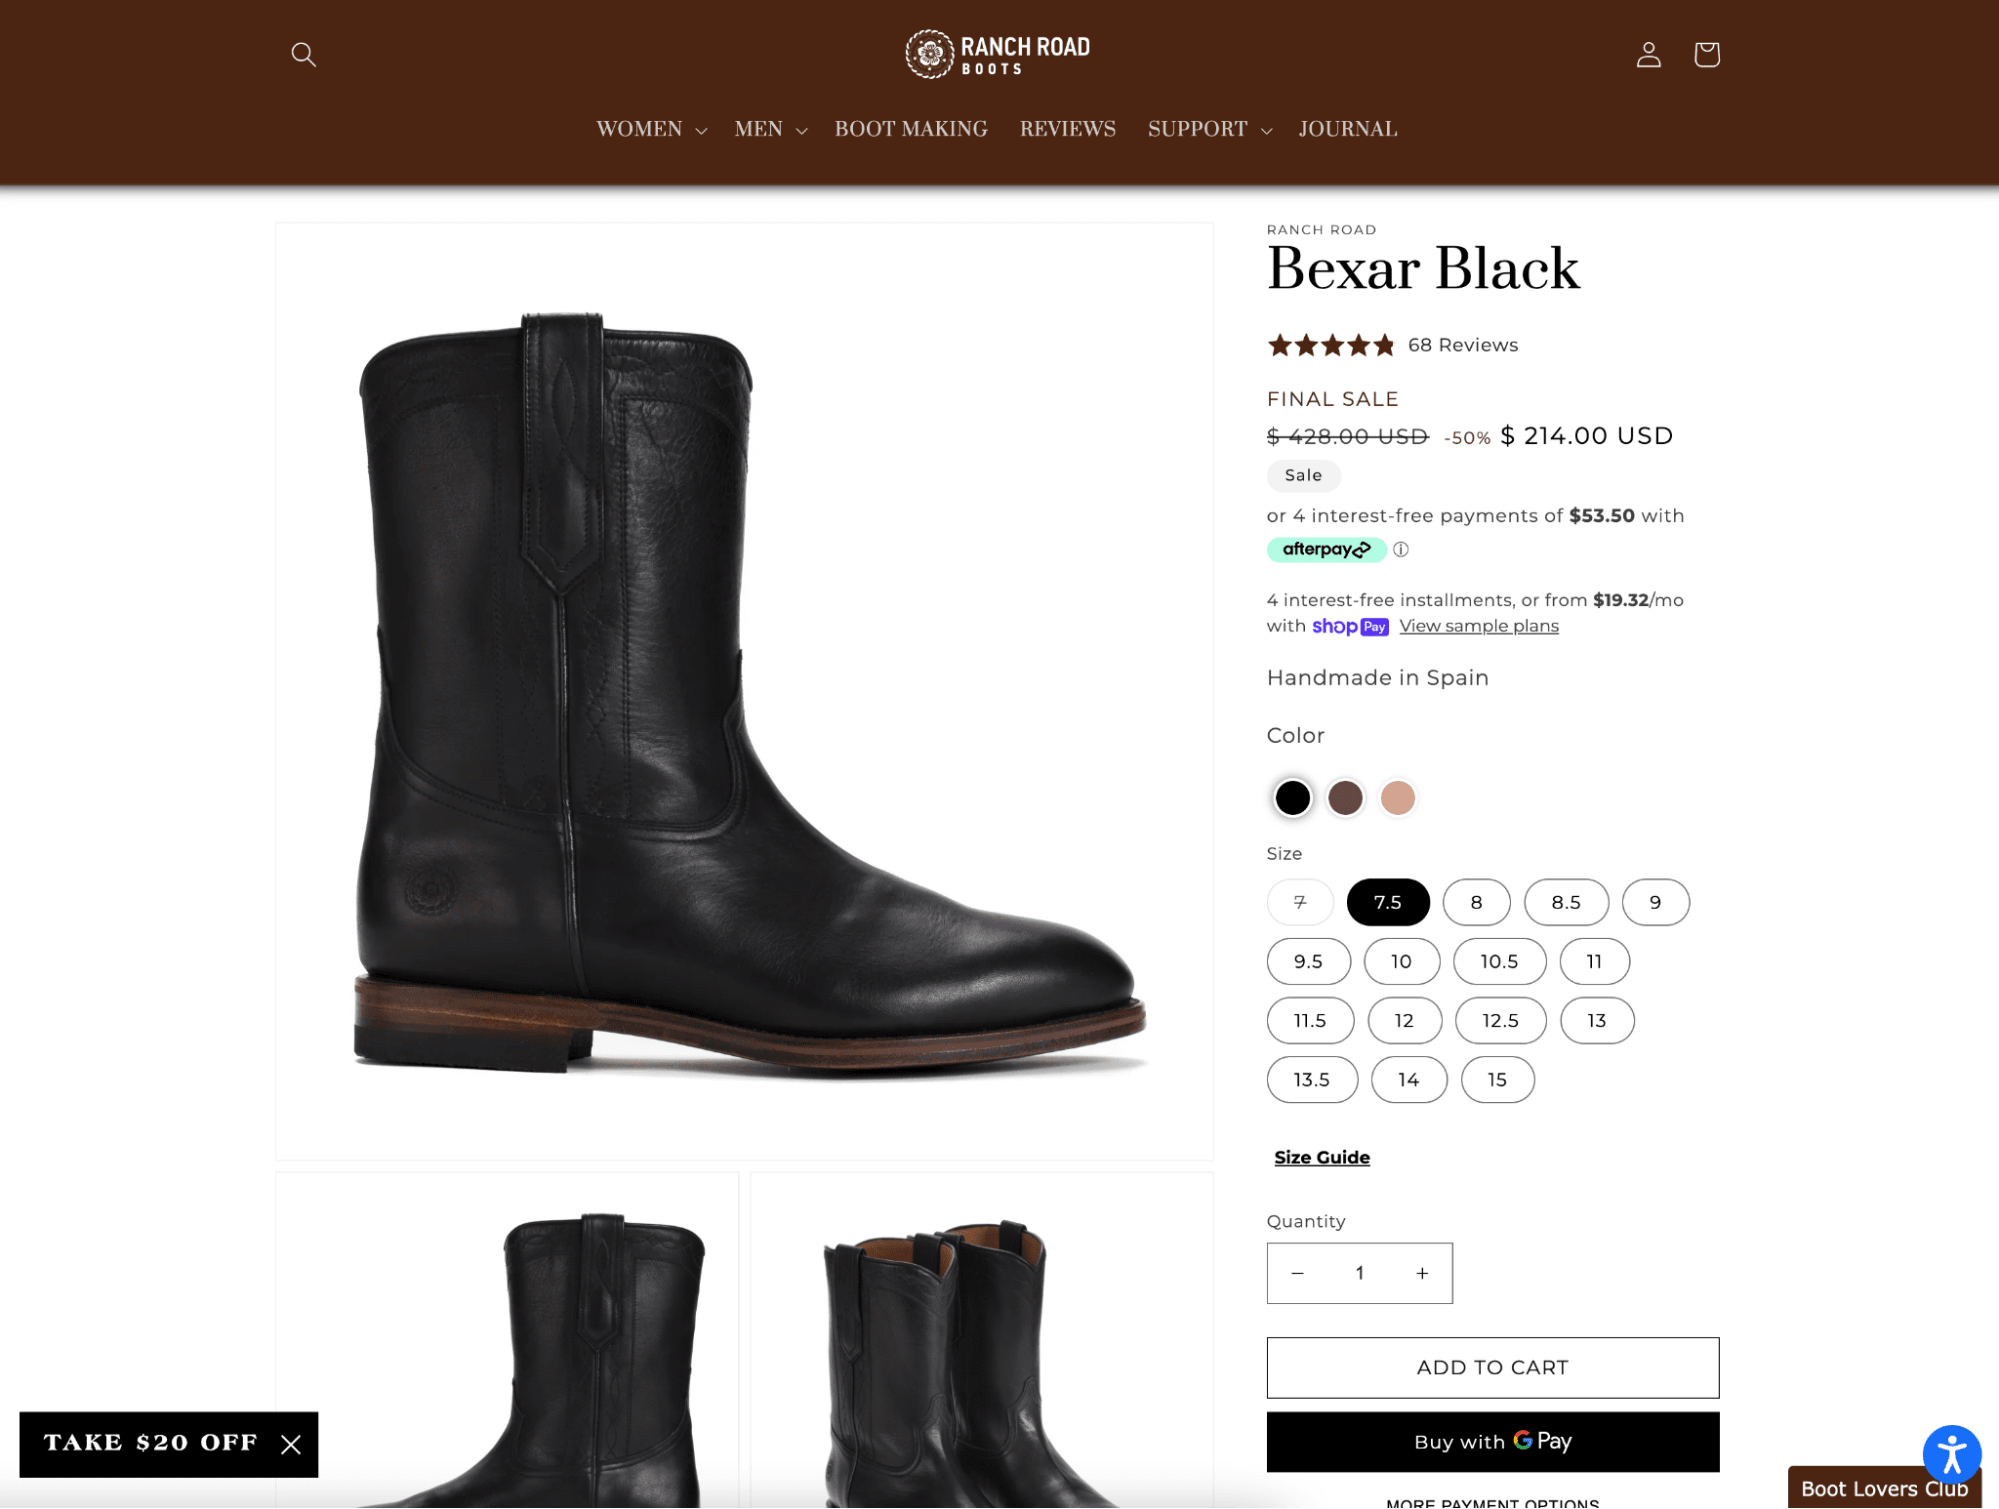 Example of excellent product page by Ranch Road Boots